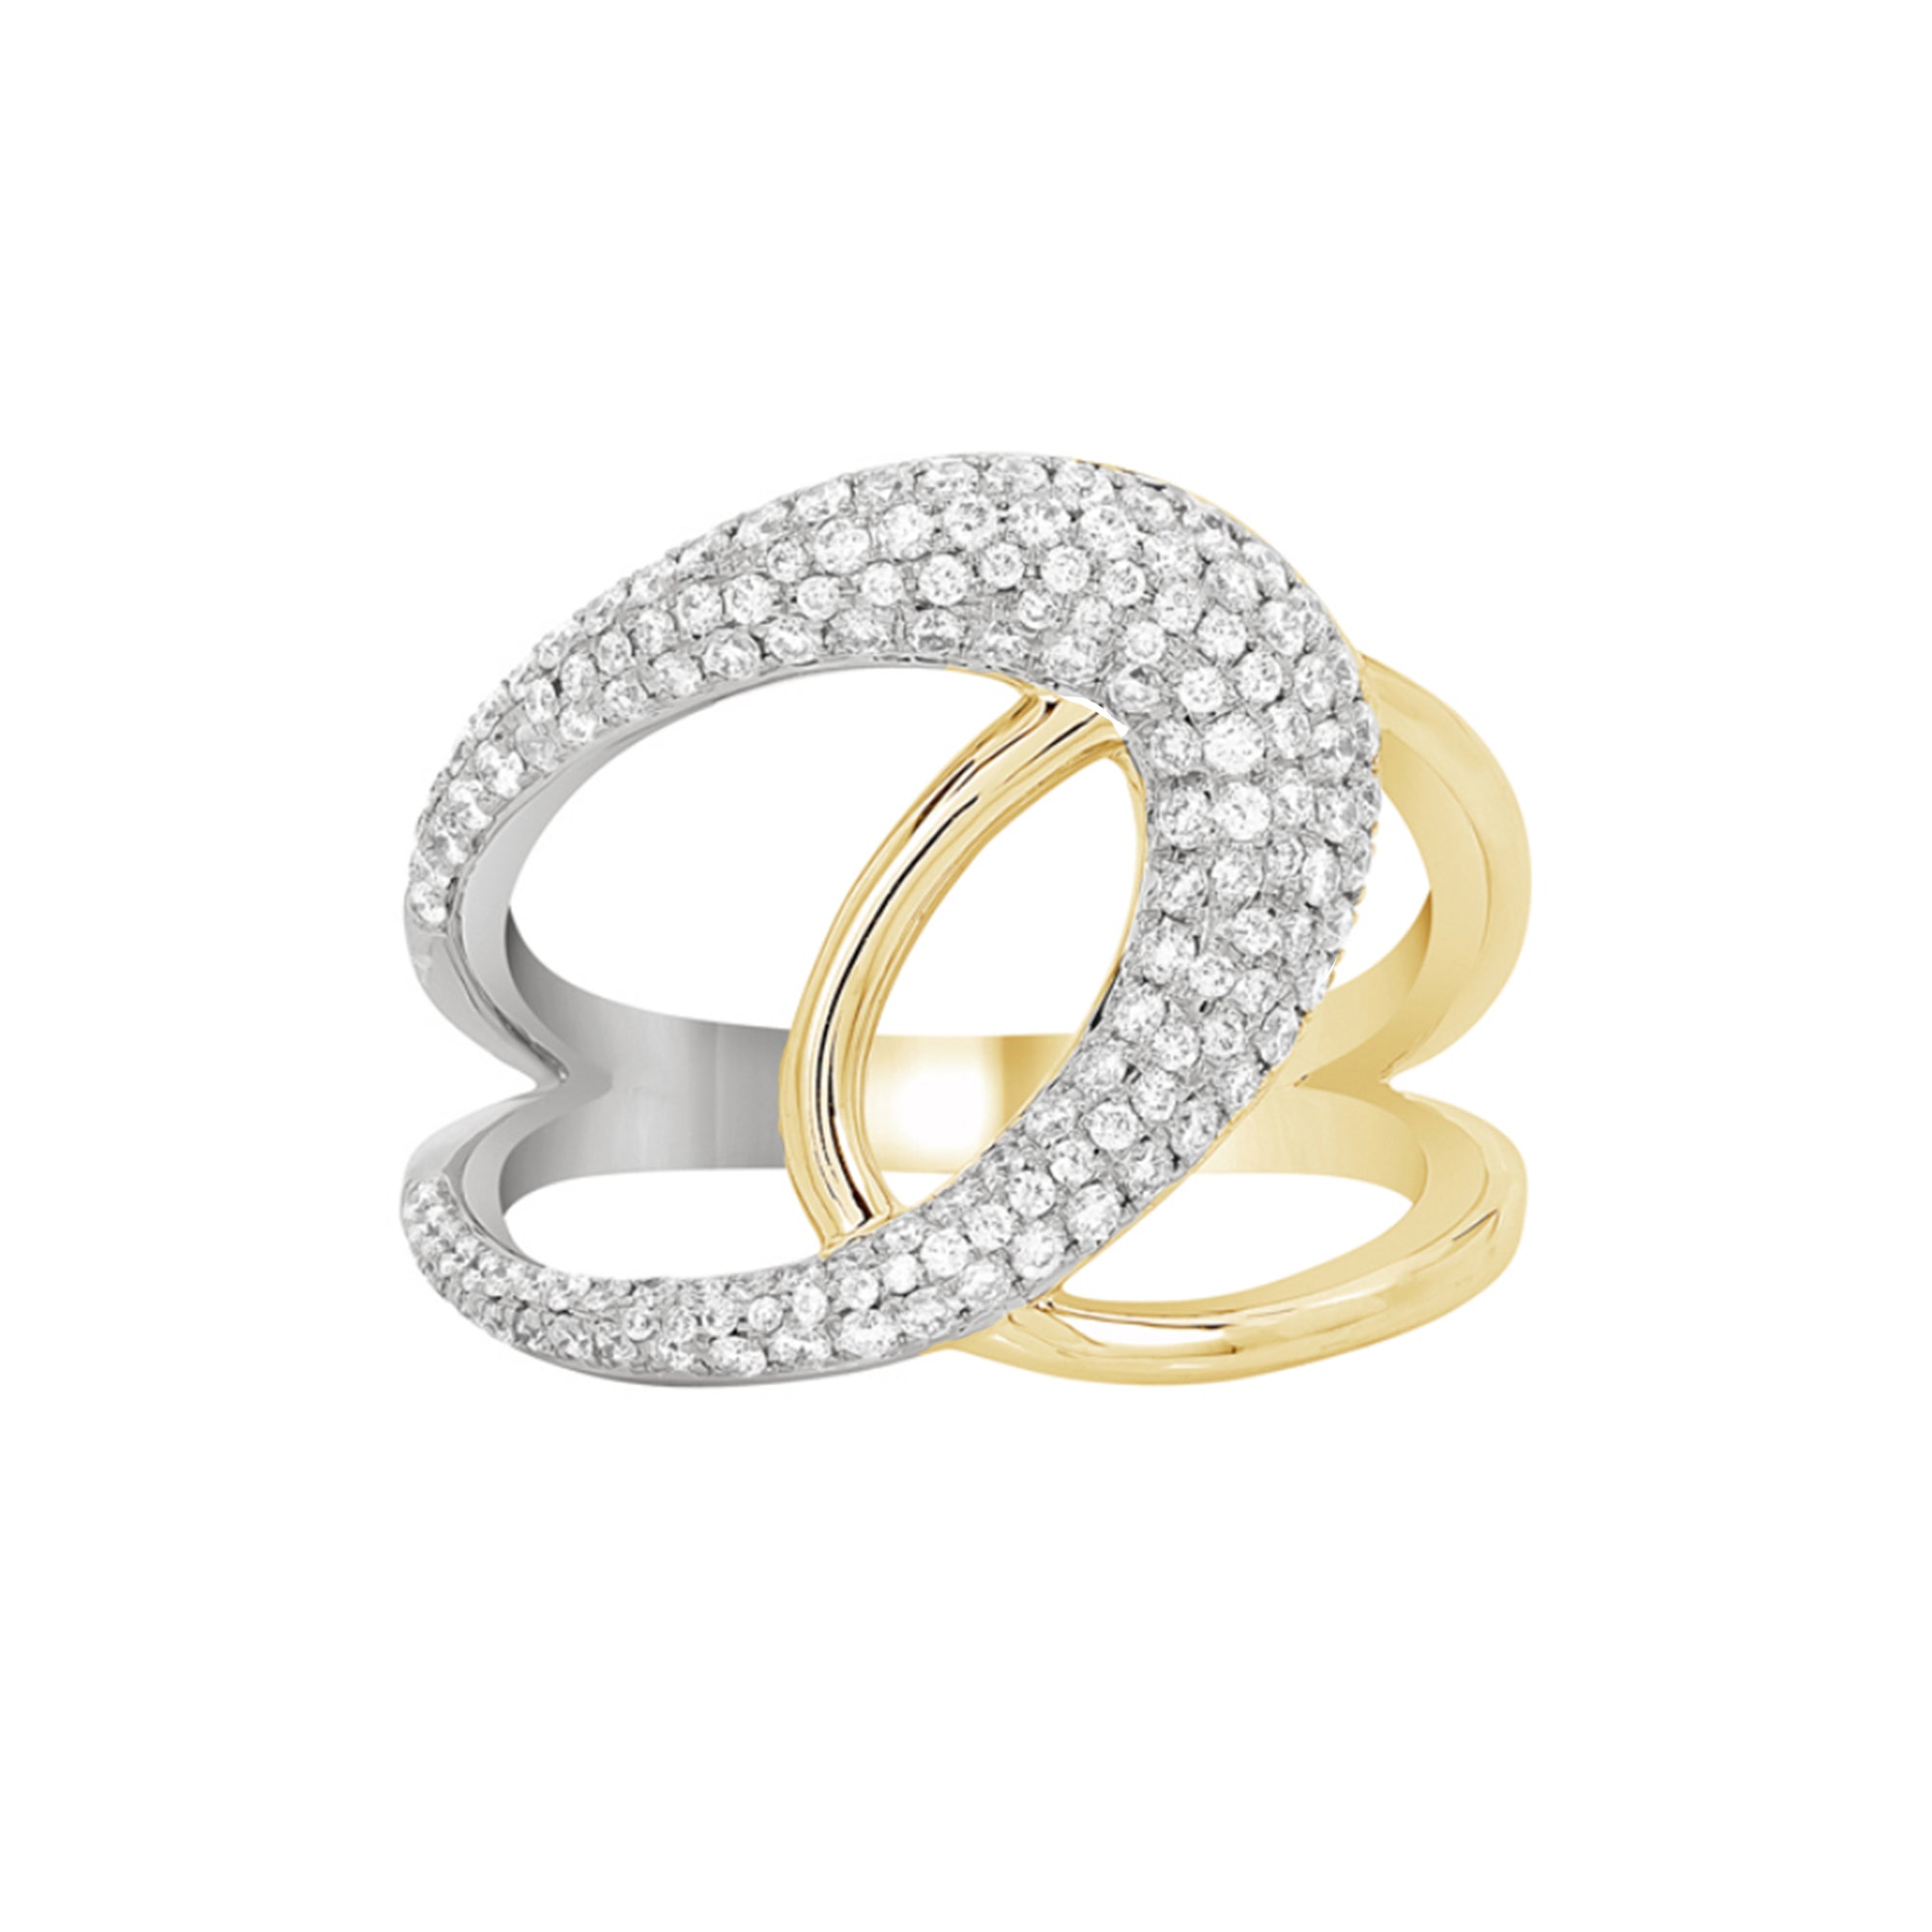 Diamond Infinity Ring in White and Yellow Gold - Talisman Collection Fine Jewelers